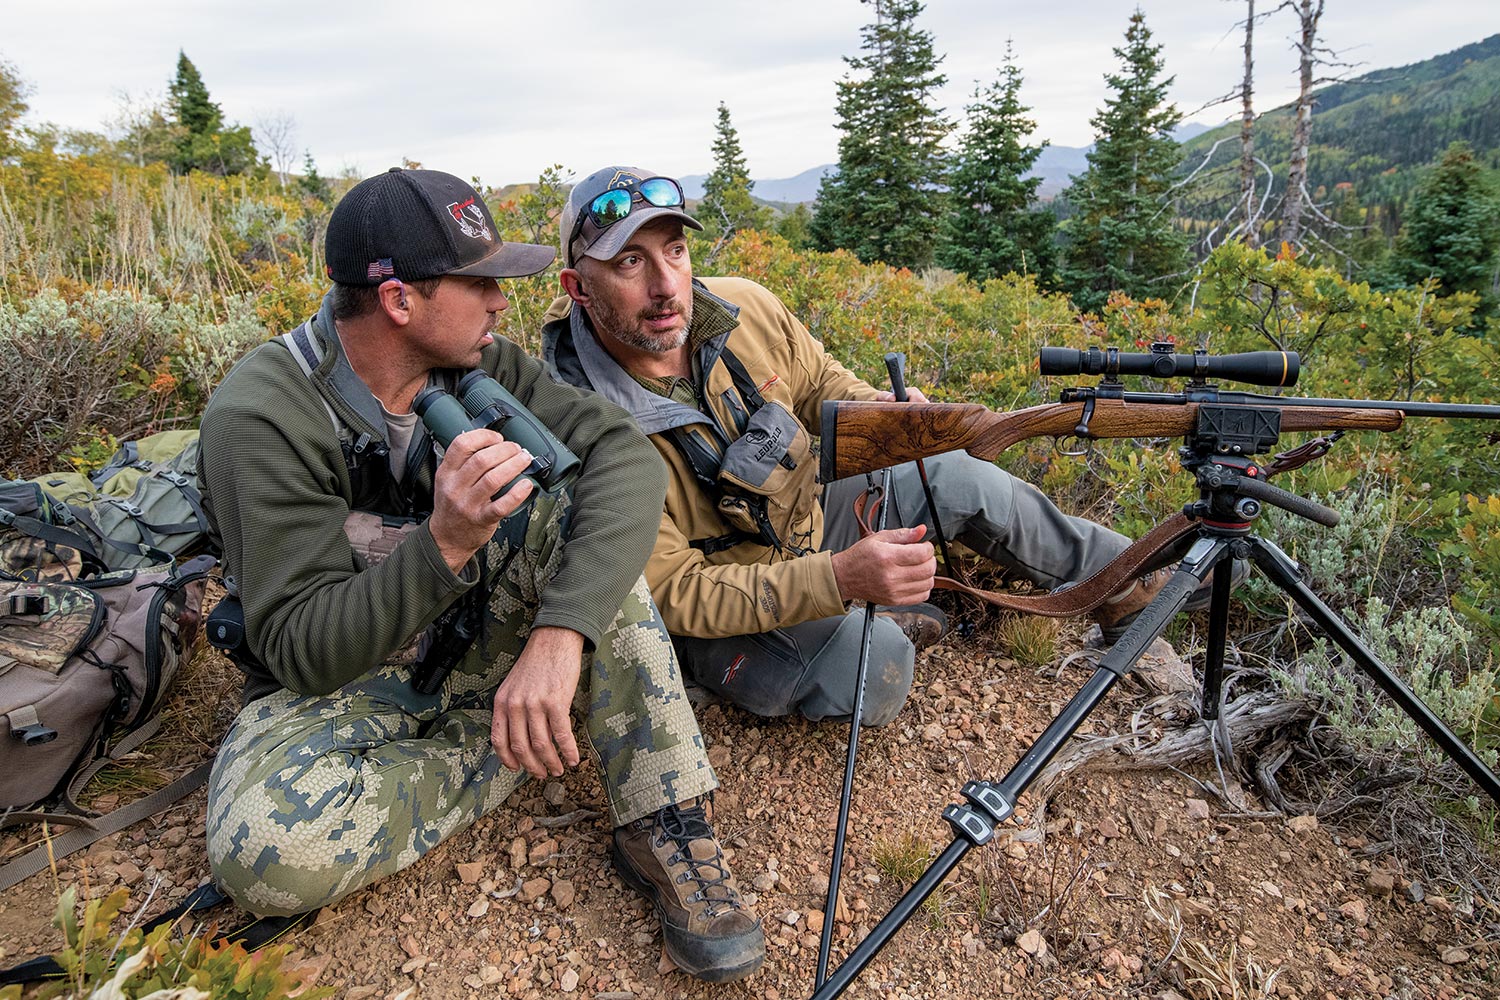 Hunter and guide, with binoculars, sit low on ground discussing plans; rifle is set up on tripod.